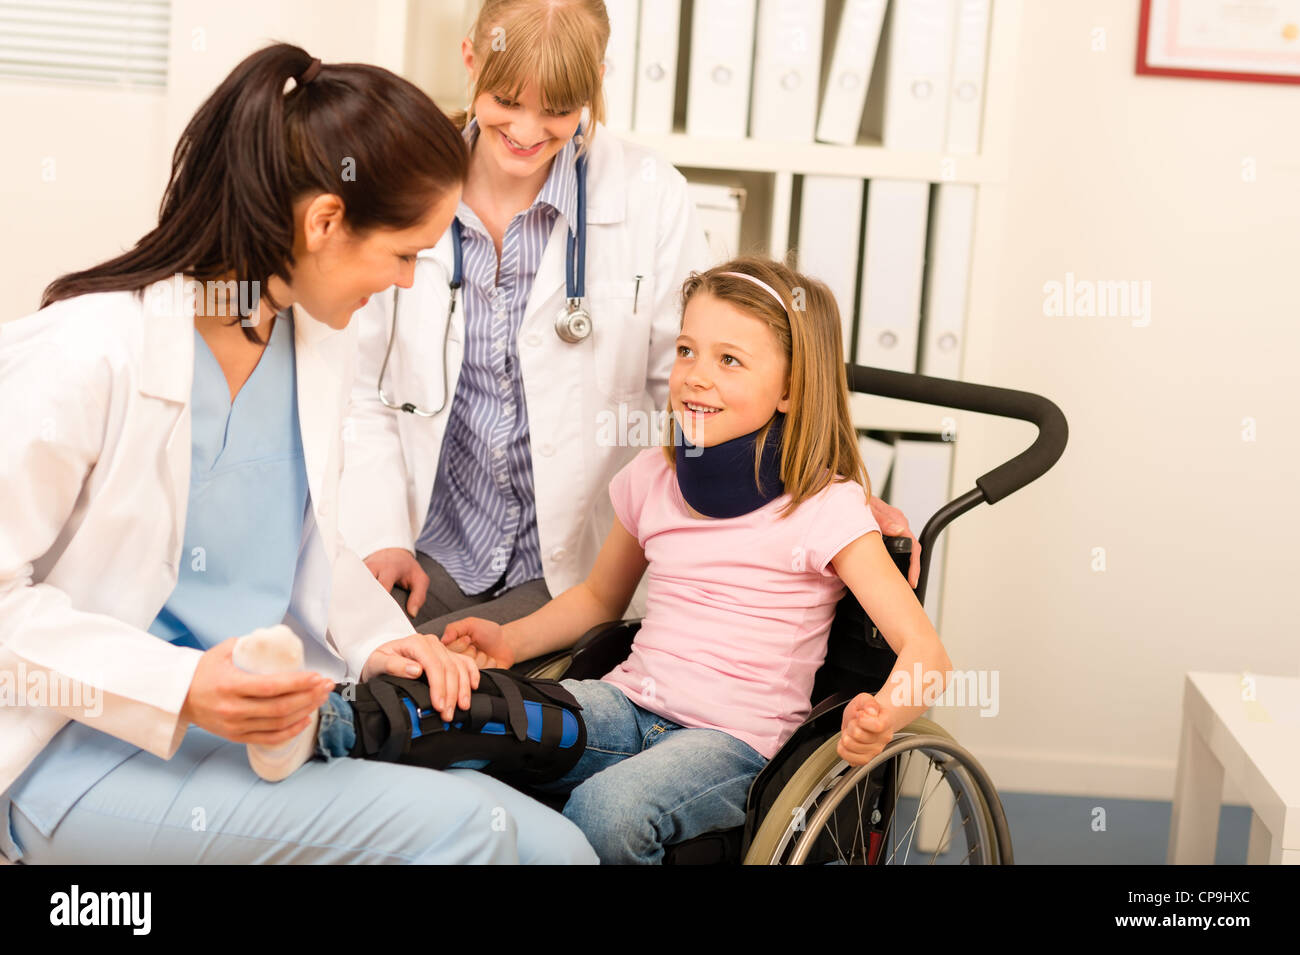 Little injured girl on wheelchair with doctors at medical office Stock Photo